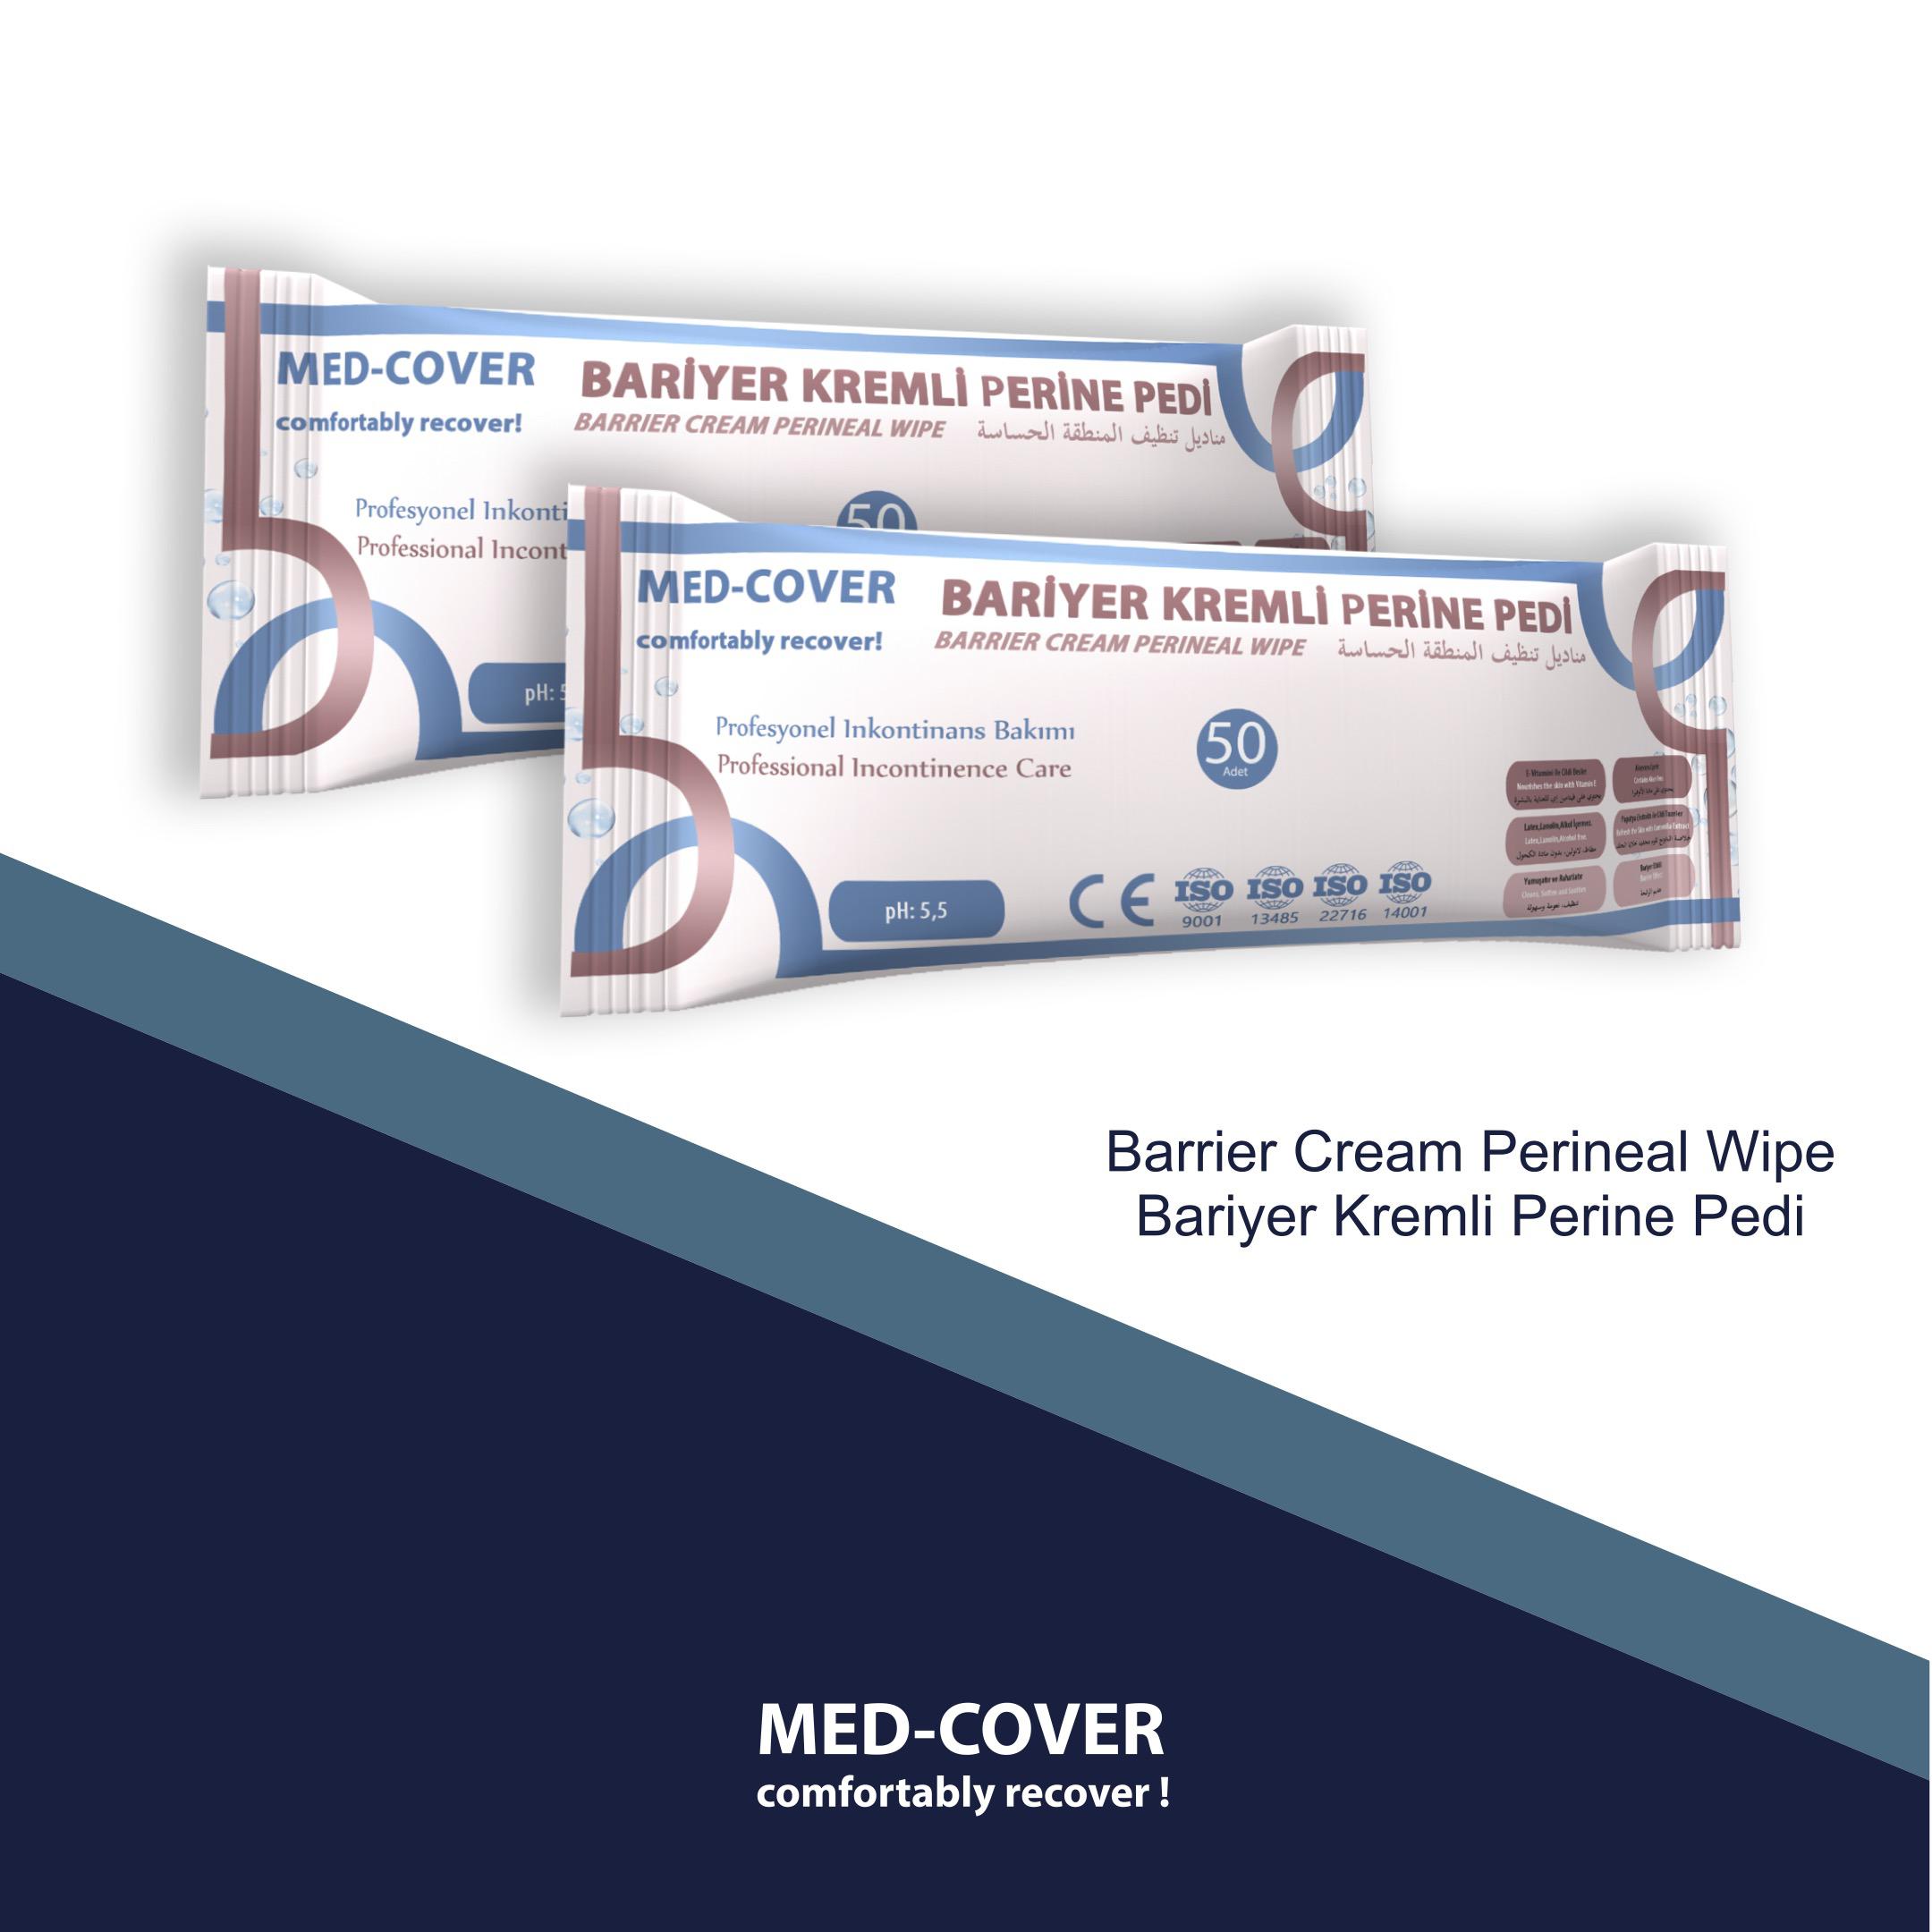 MED-COVER Barrier Cream Perineal Wipe